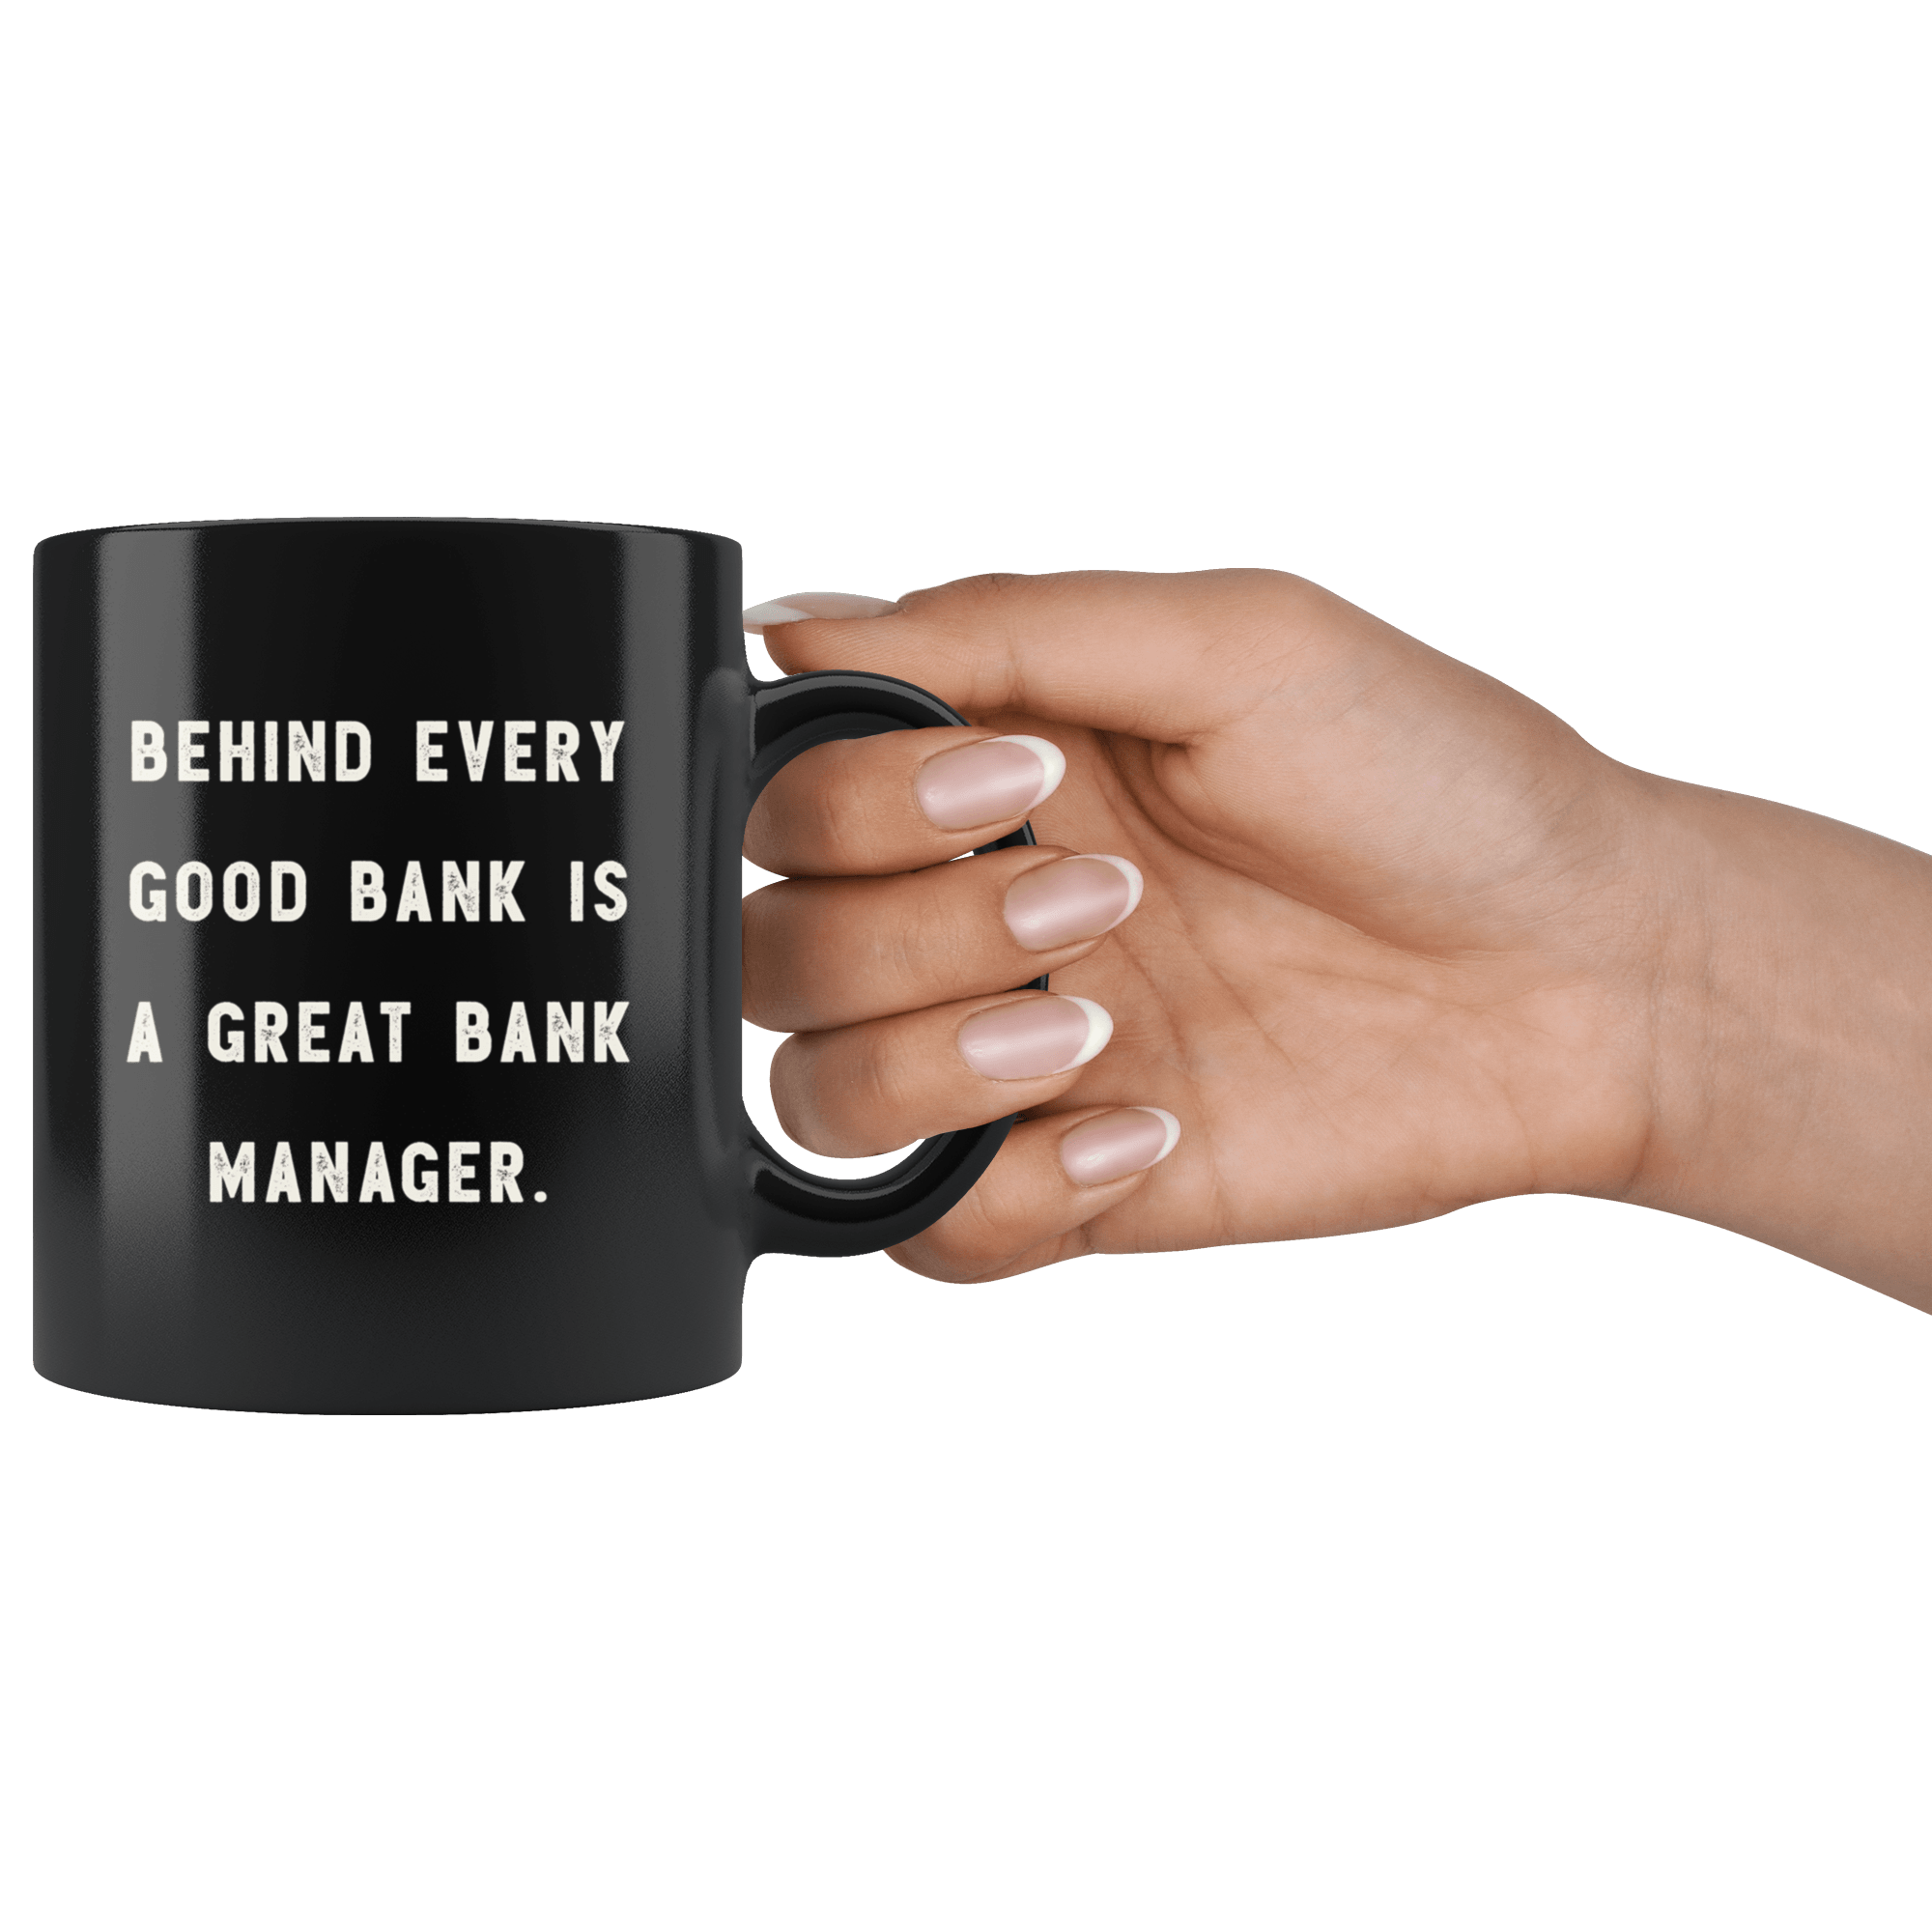 Bank Teller Gifts, Banker Gift, Bank Manager, Fun Mug, Office Staff Gifts,  Gifts for Office Staff, Fun Office Gifts for Employees - Etsy